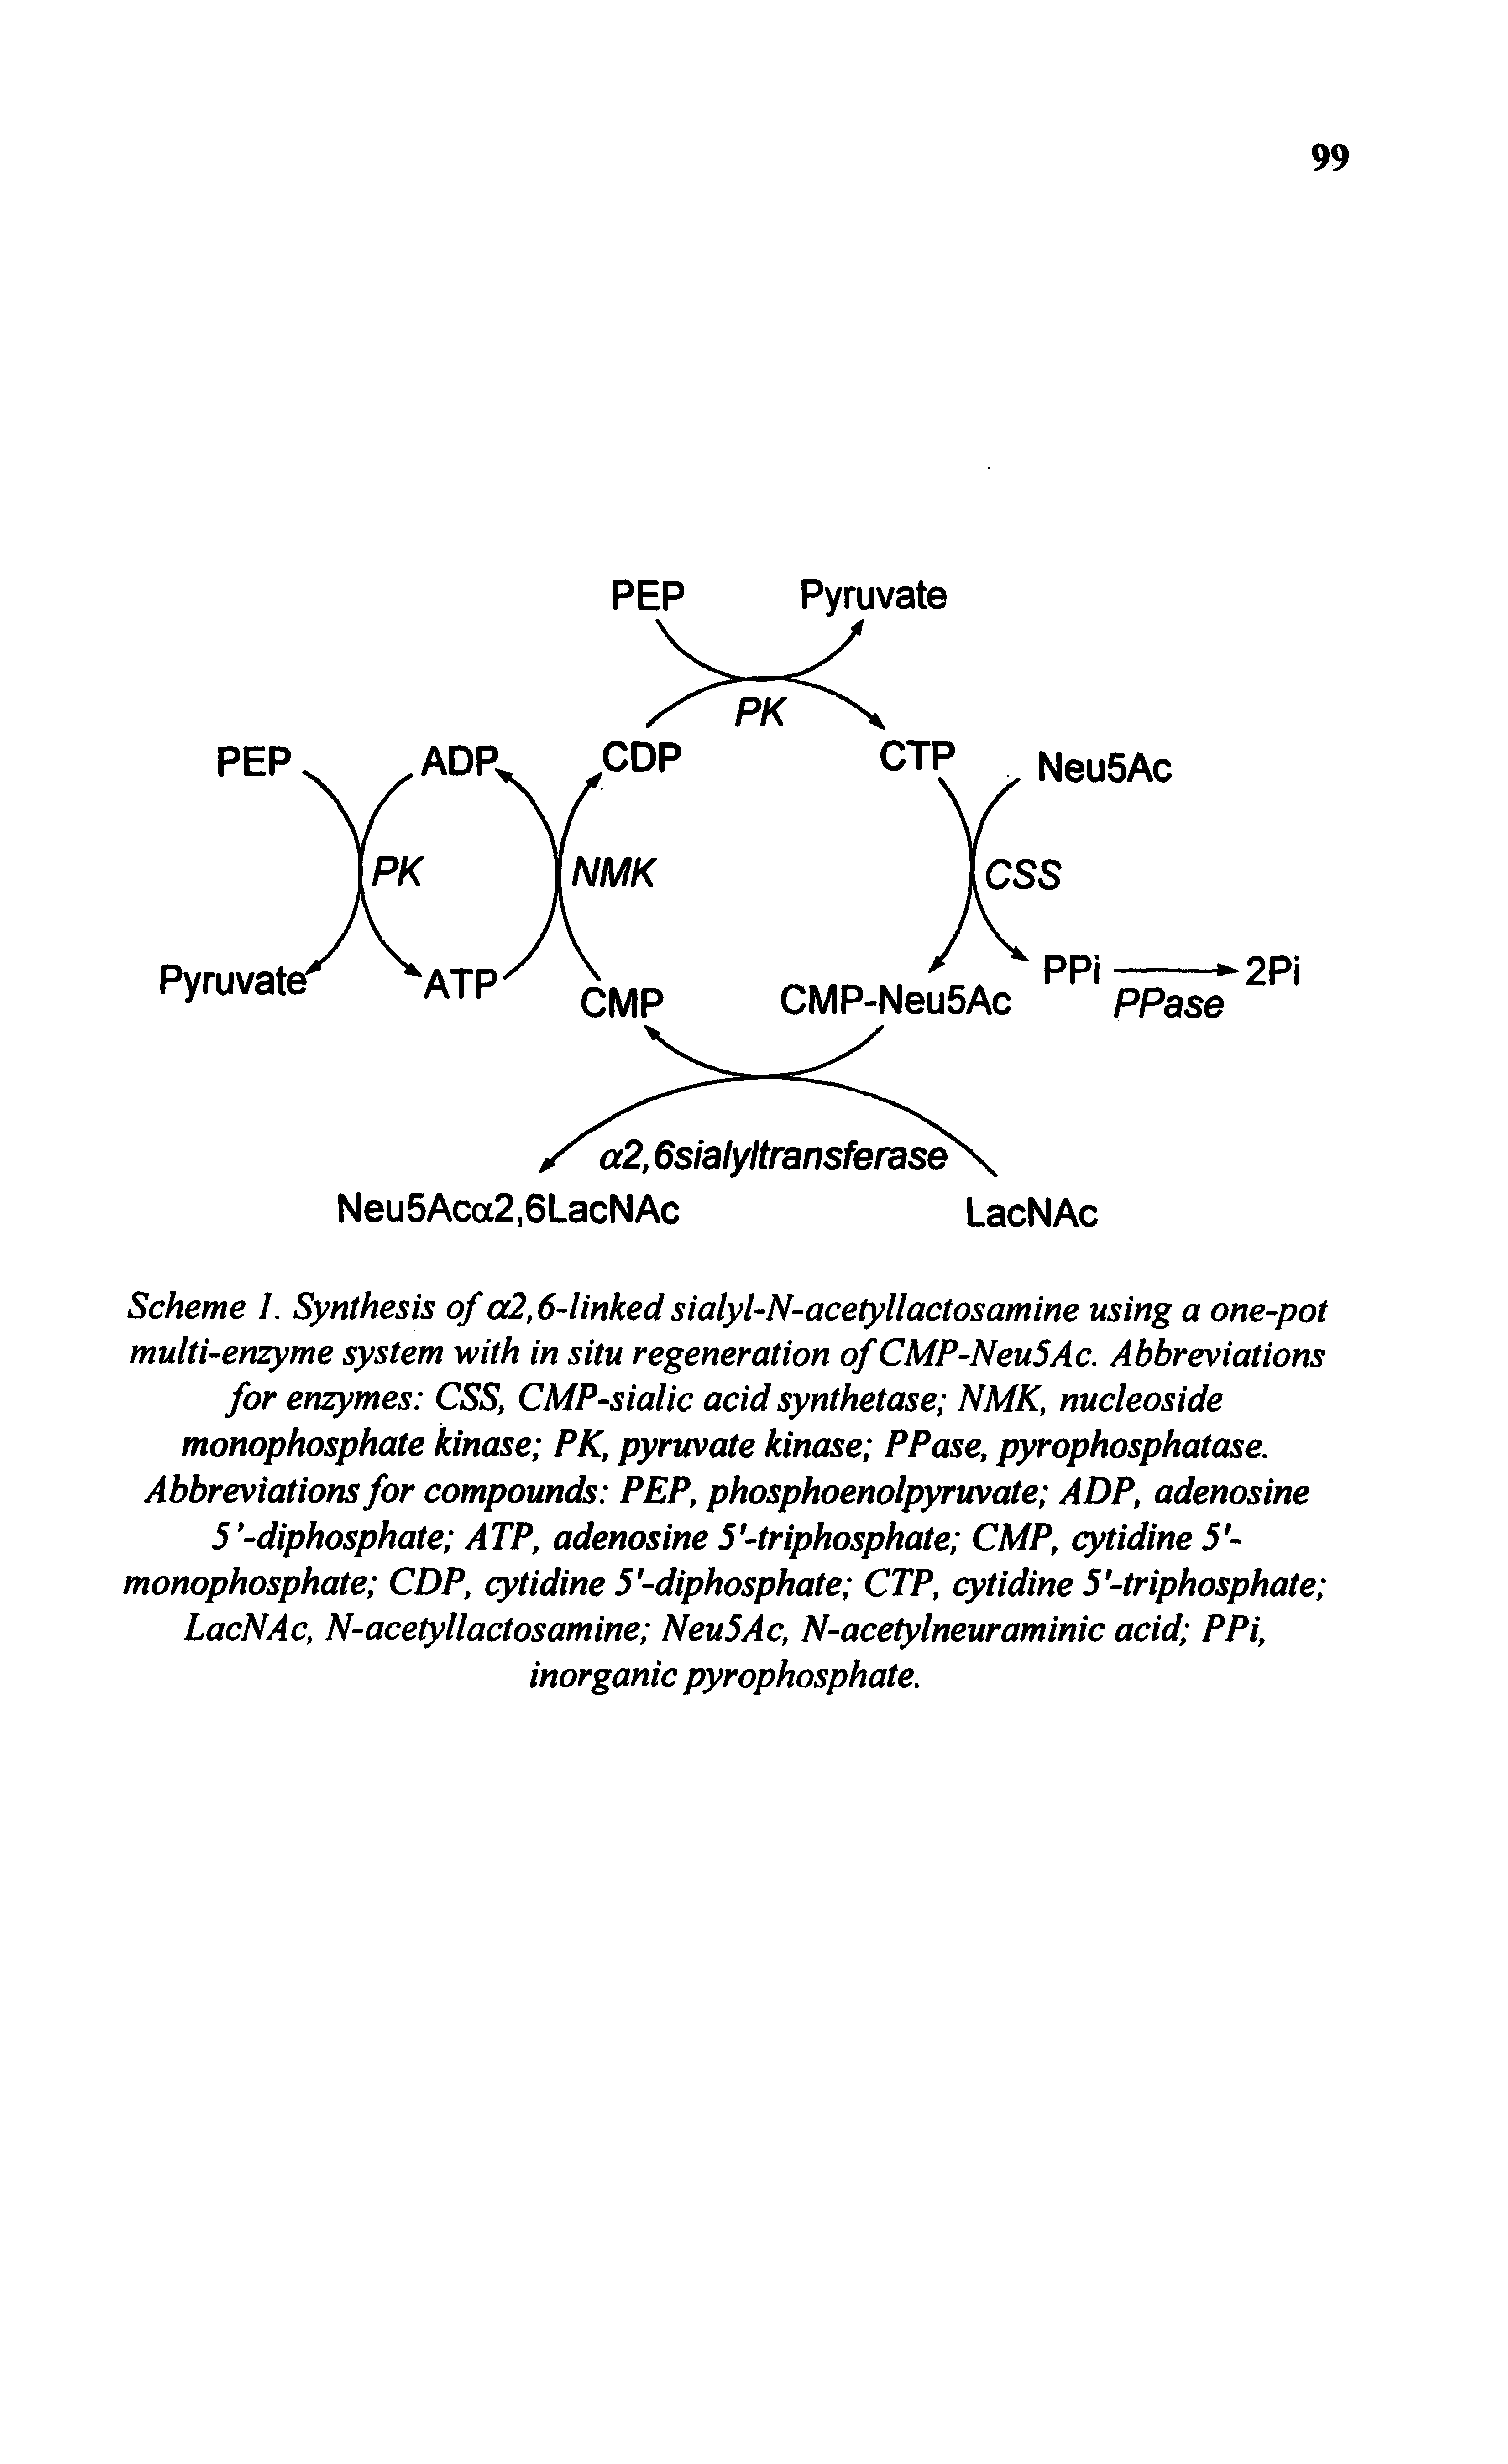 Scheme L Synthesis of a2,64inked sialyl-N-acetyllactosamine using a one-pot multi-enzyme system with in situ regeneration of CMP-Neu5Ac. Abbreviations for enzymes CSS, CMP-sialic acid synthetase NMK, nucleoside monophosphate kinase PK, pyruvate kinase PPase, pyrophosphatase. Abbreviations for compounds PEP, phosphoenolpyruvate ADP, adenosine 5 -diphosphate ATP, adenosine 5 -triphosphate CMP, cytidine 5-monophosphate CDP, cytidine 5 -diphosphate CTP, cytidine 5-triphosphate LacNAc, N-acetyllactosamine NeuSAc, N-acetylneuraminic acid PPi, inorganic pyrophosphate.